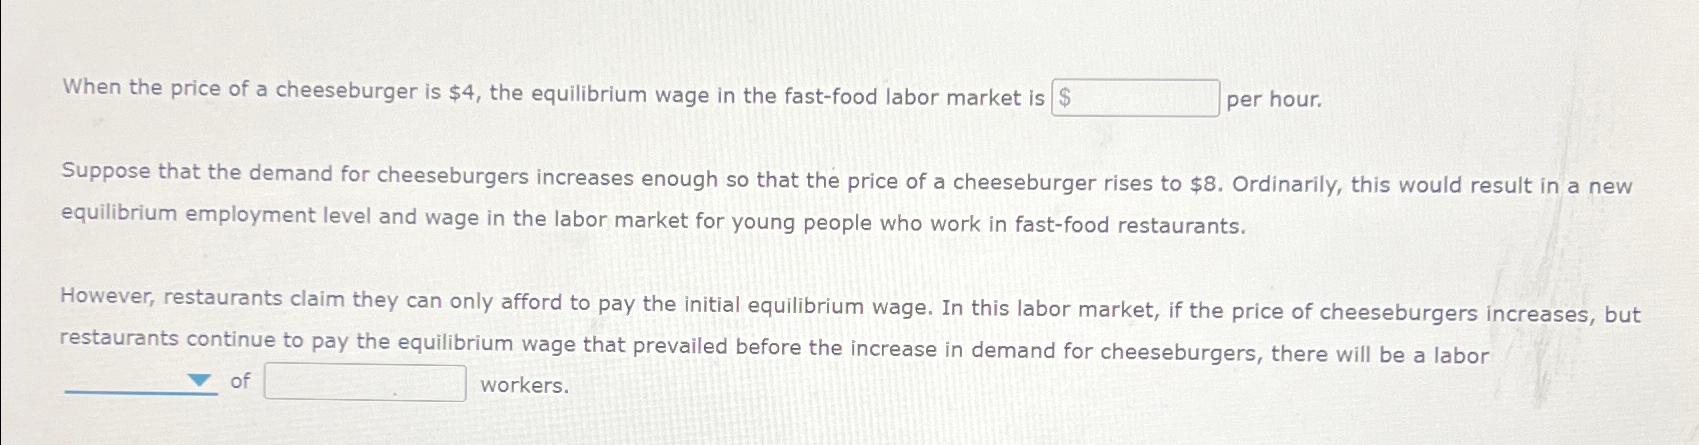 When the price of a cheeseburger is $4, the equilibrium wage in the fast-food labor market is $ per hour.